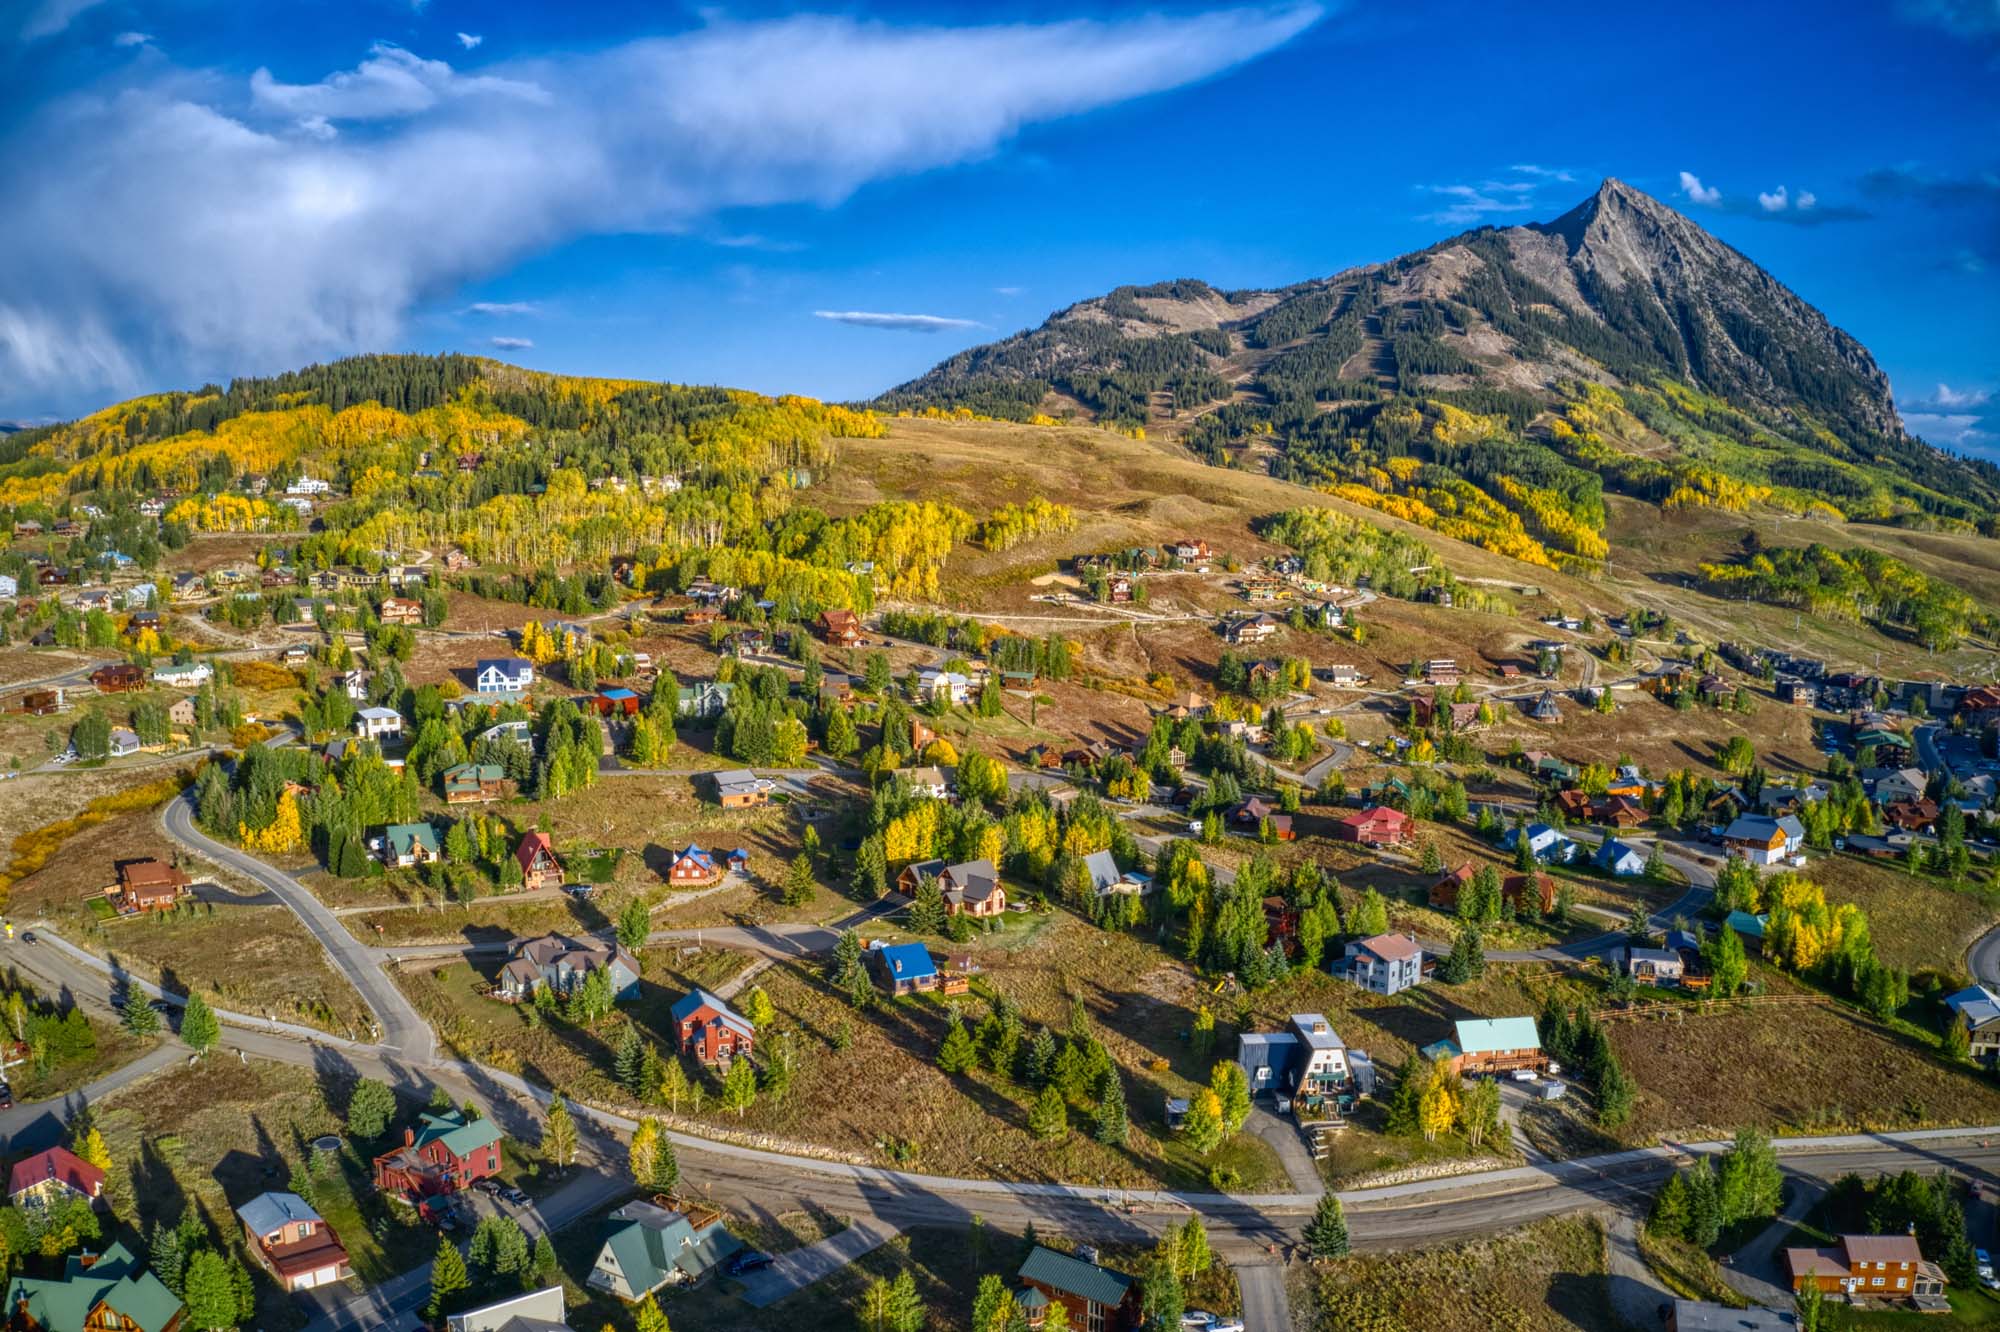 Aerial view of the popular ski town of Crested Butte